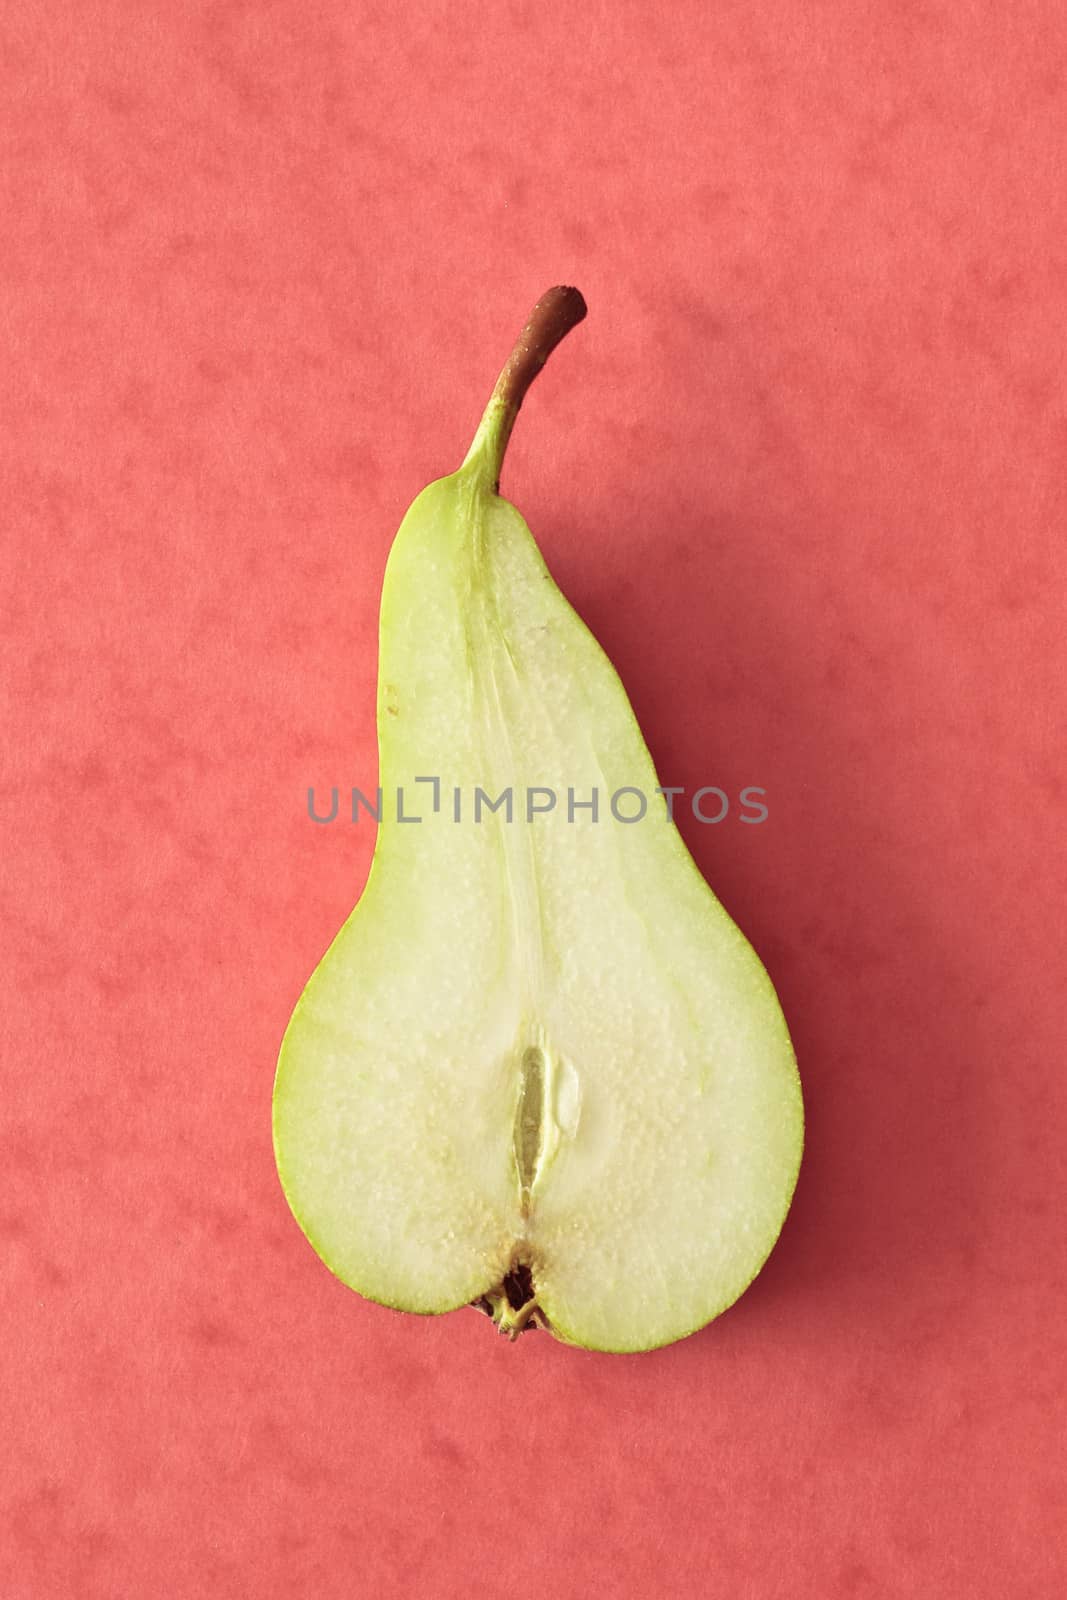 Slice of a pear  on a red background